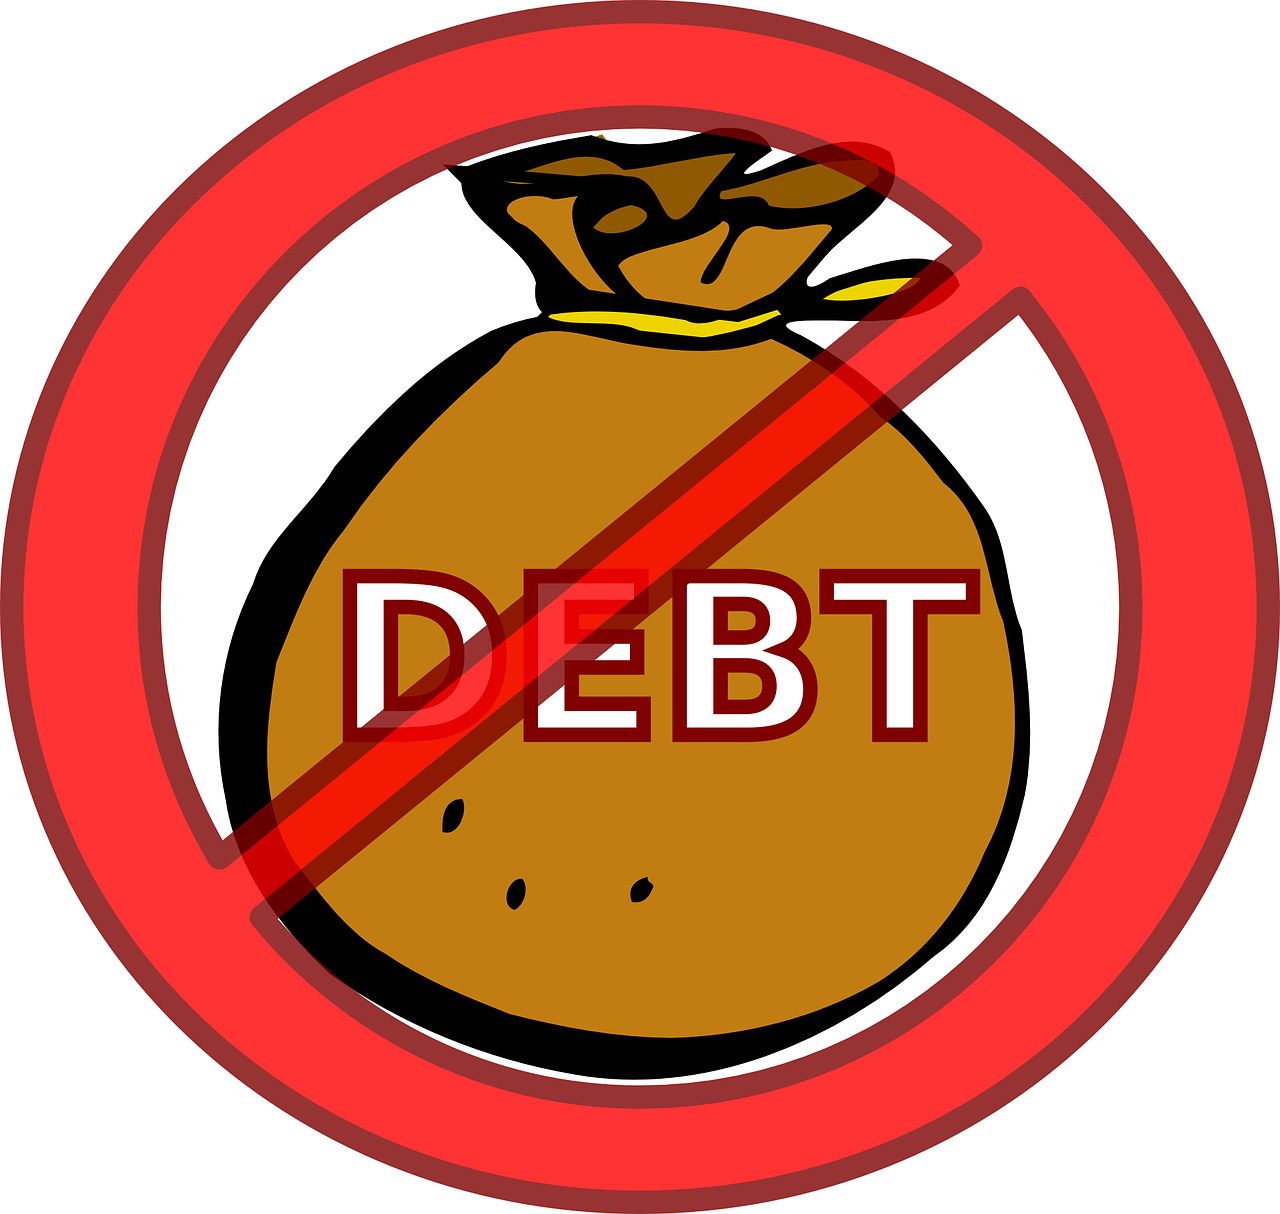 What Is My Current Debt Situation, And What Steps Can I Take To Reduce It In The New Year?